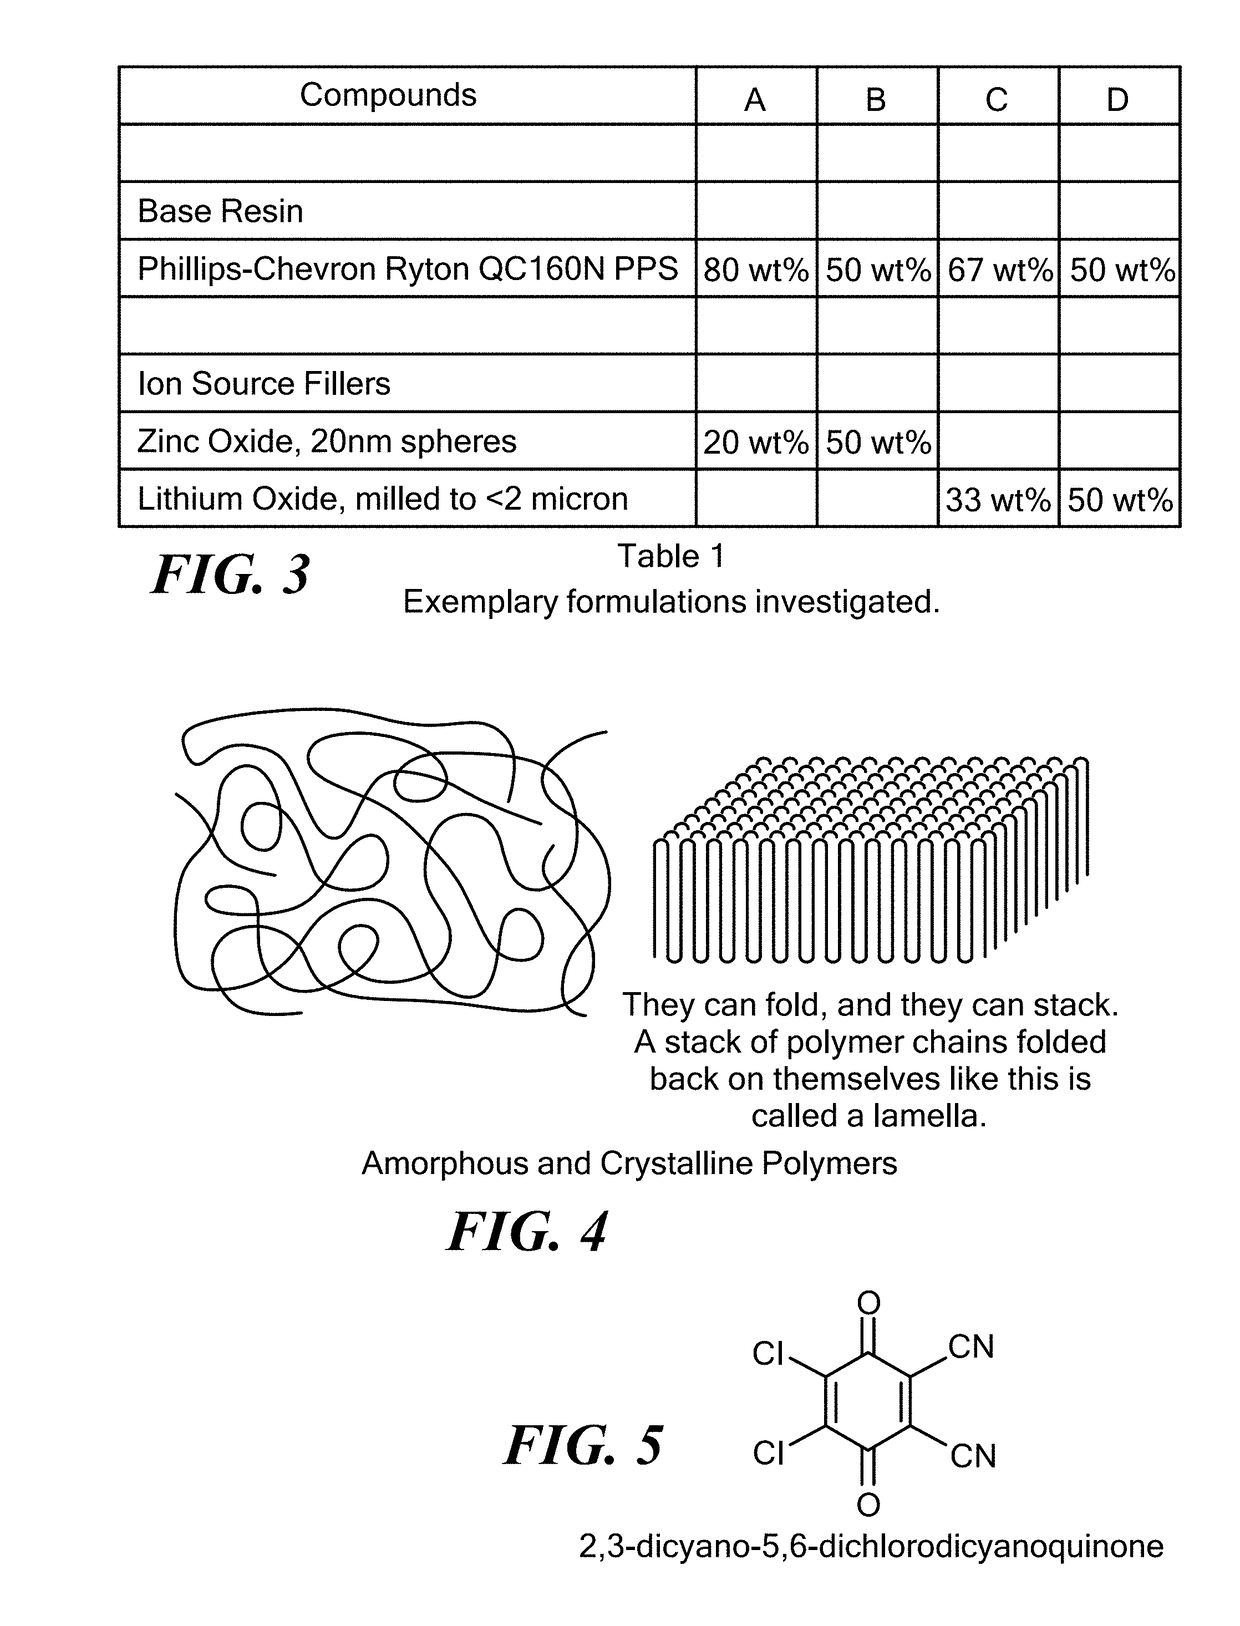 Electrochemical cell having solid ionically conducting polymer material